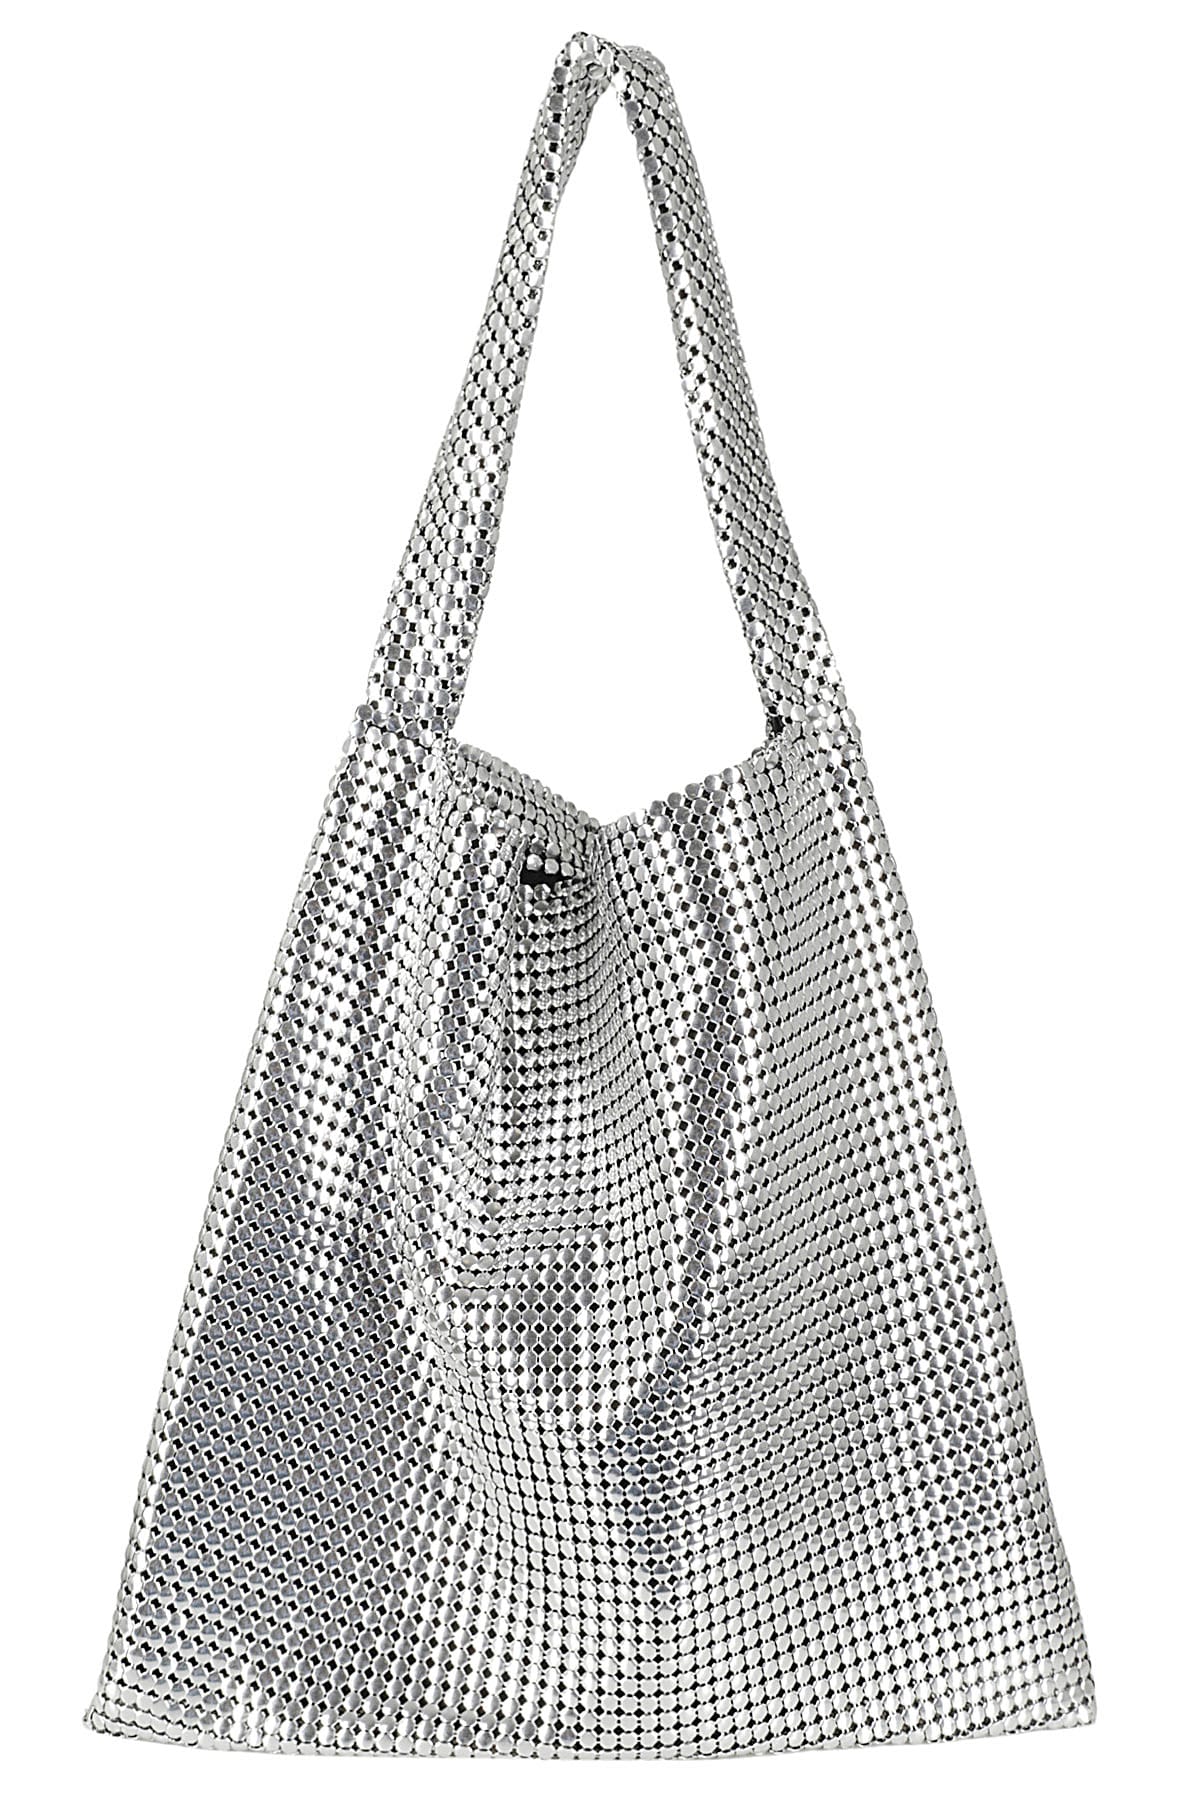 Paco Rabanne Cabas In Silver